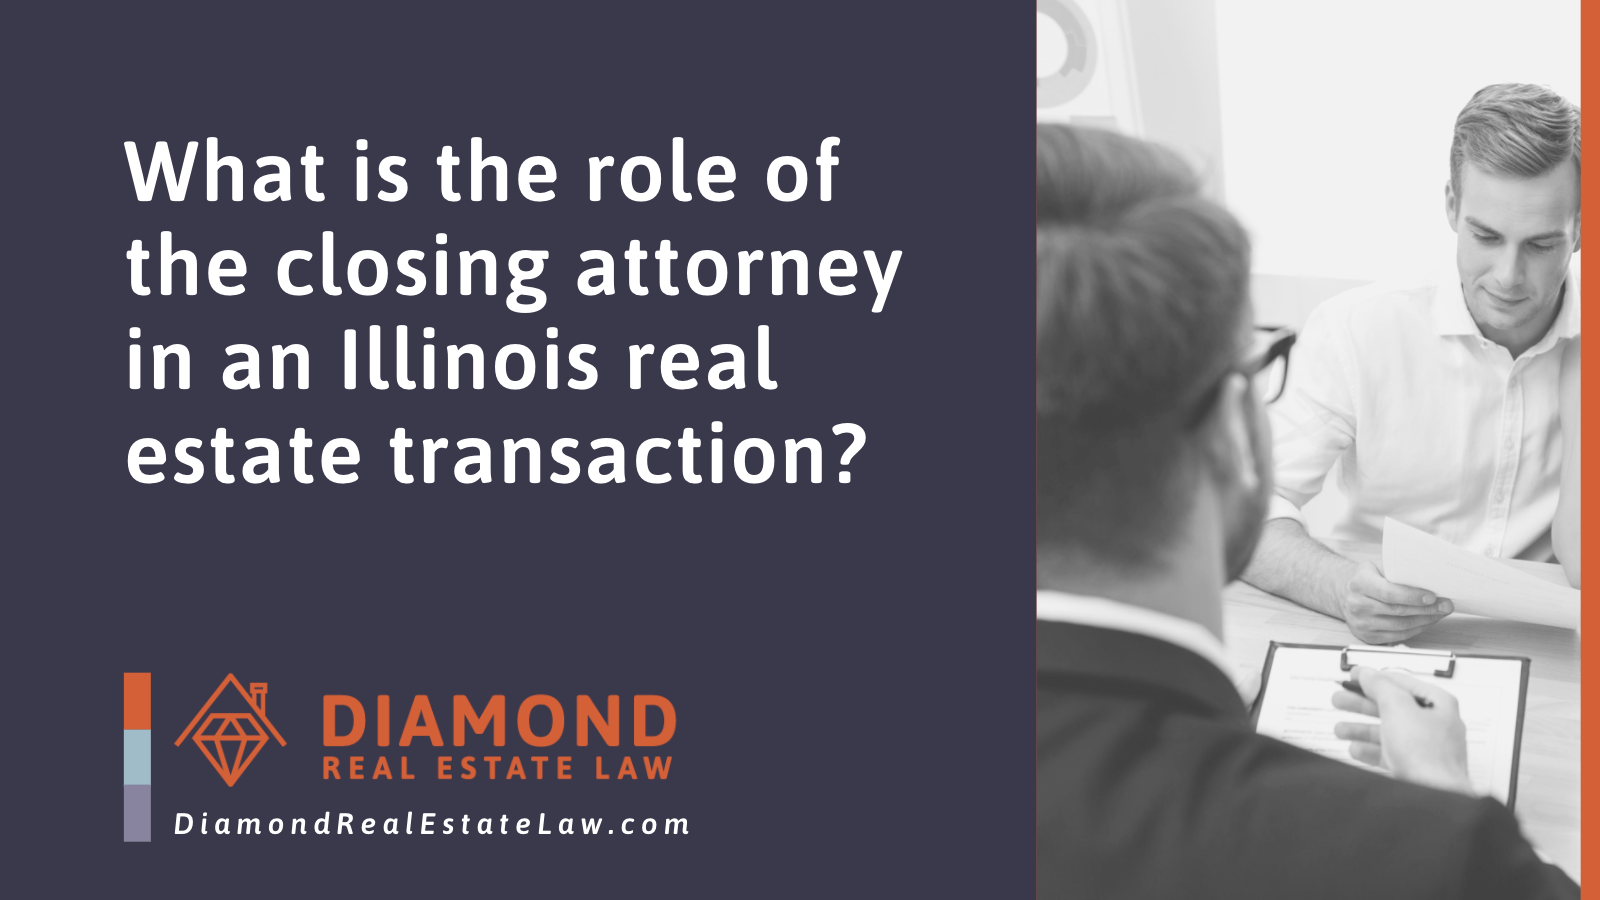 Real Estate Attorney: Seamless Transactions and Legal Expertise